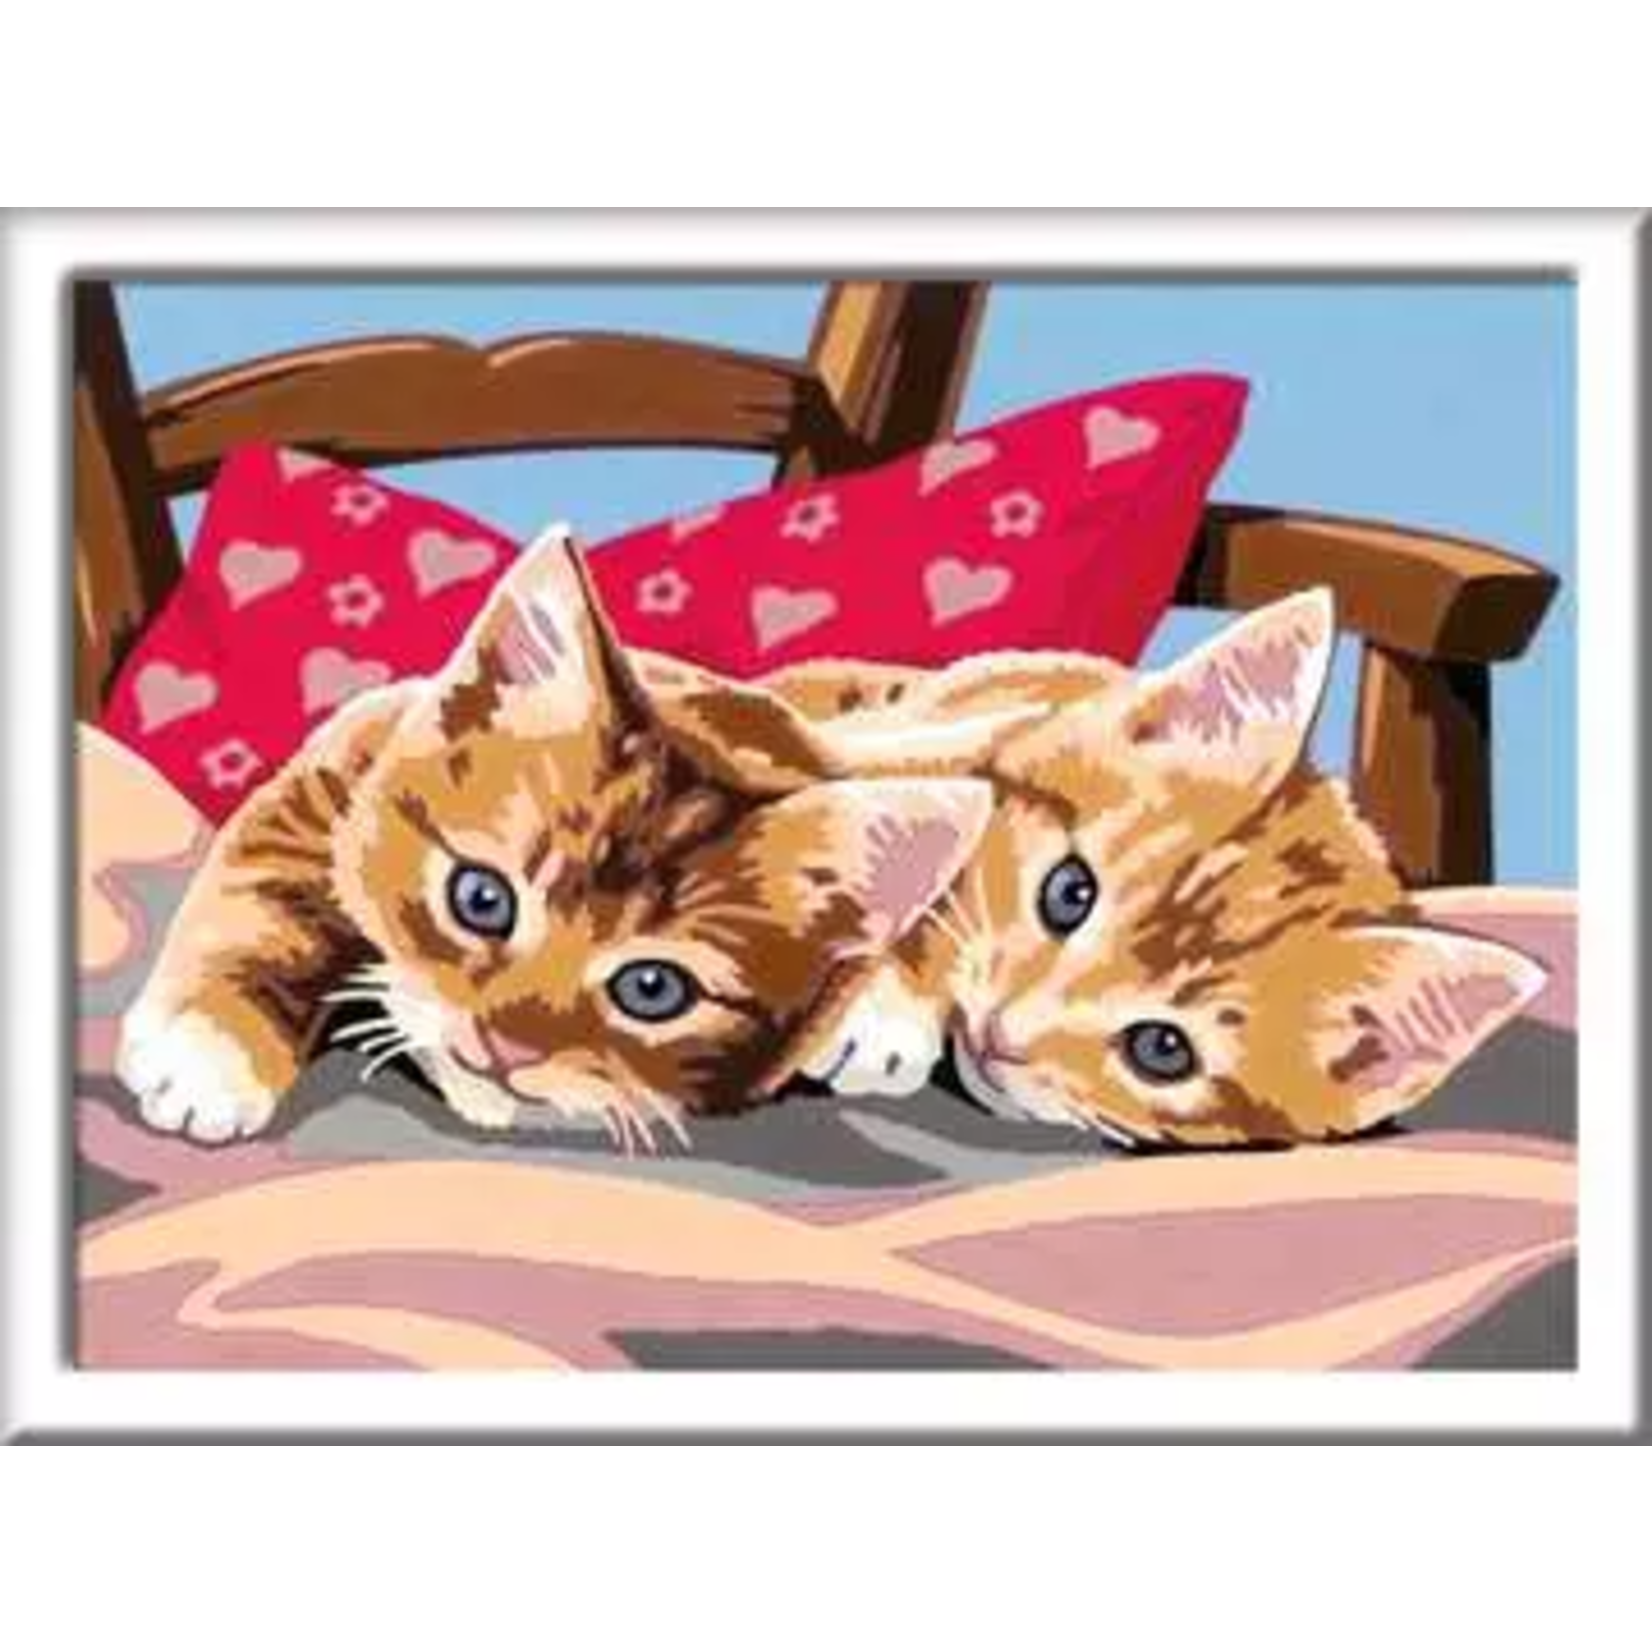 CreArt CreArt: Two Cuddly Cats  7x10